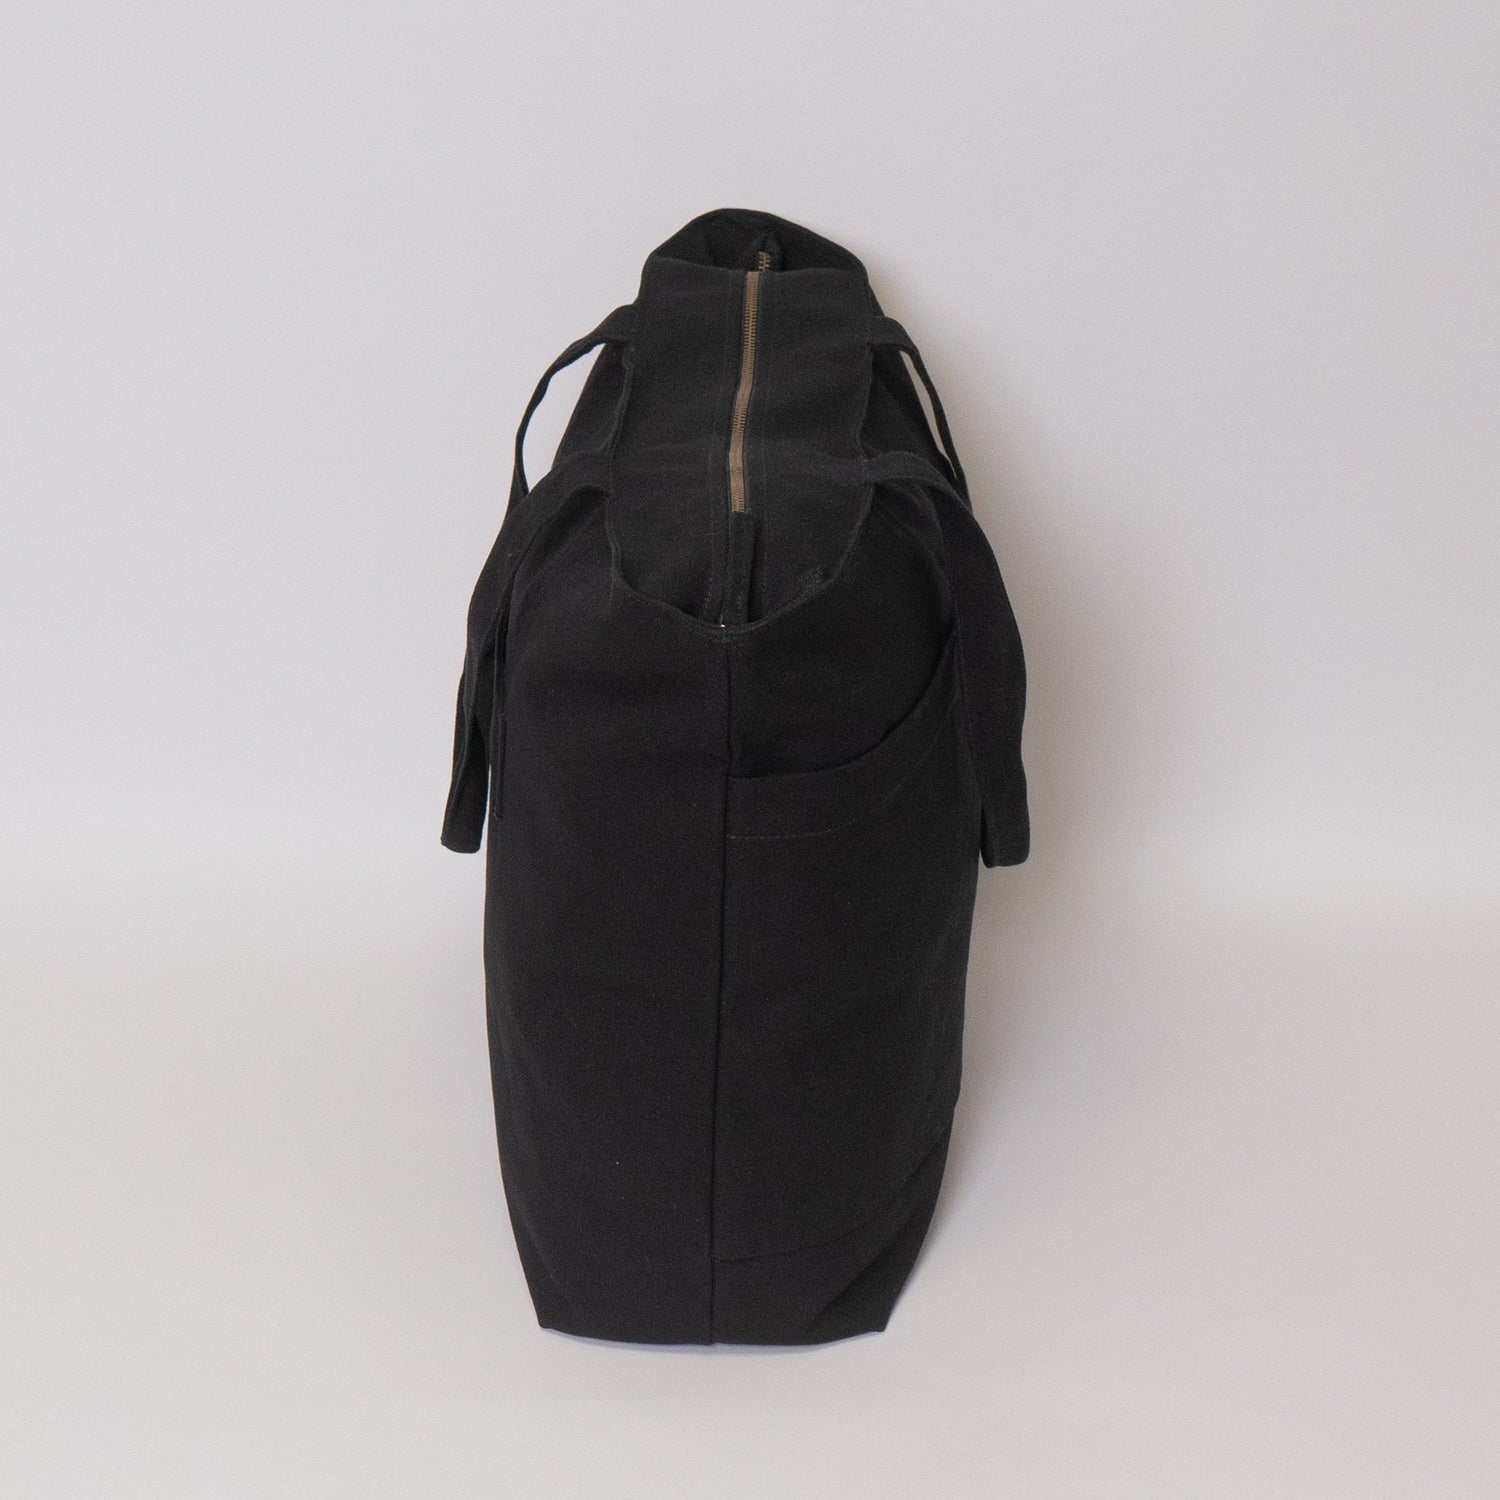 travel tote bag with zipper in black